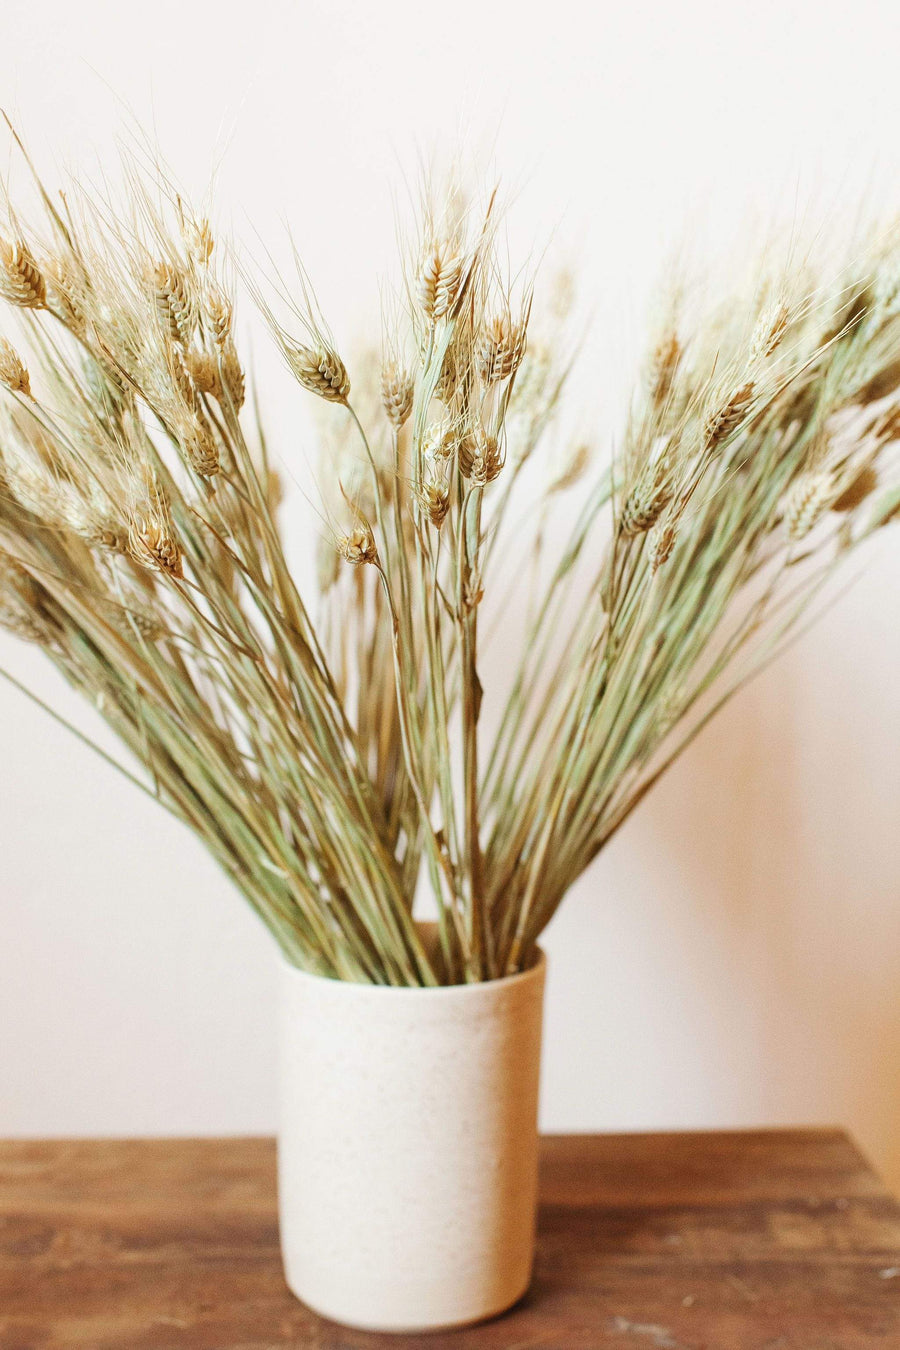 Idlewild Floral Co. Dried Green Wheat